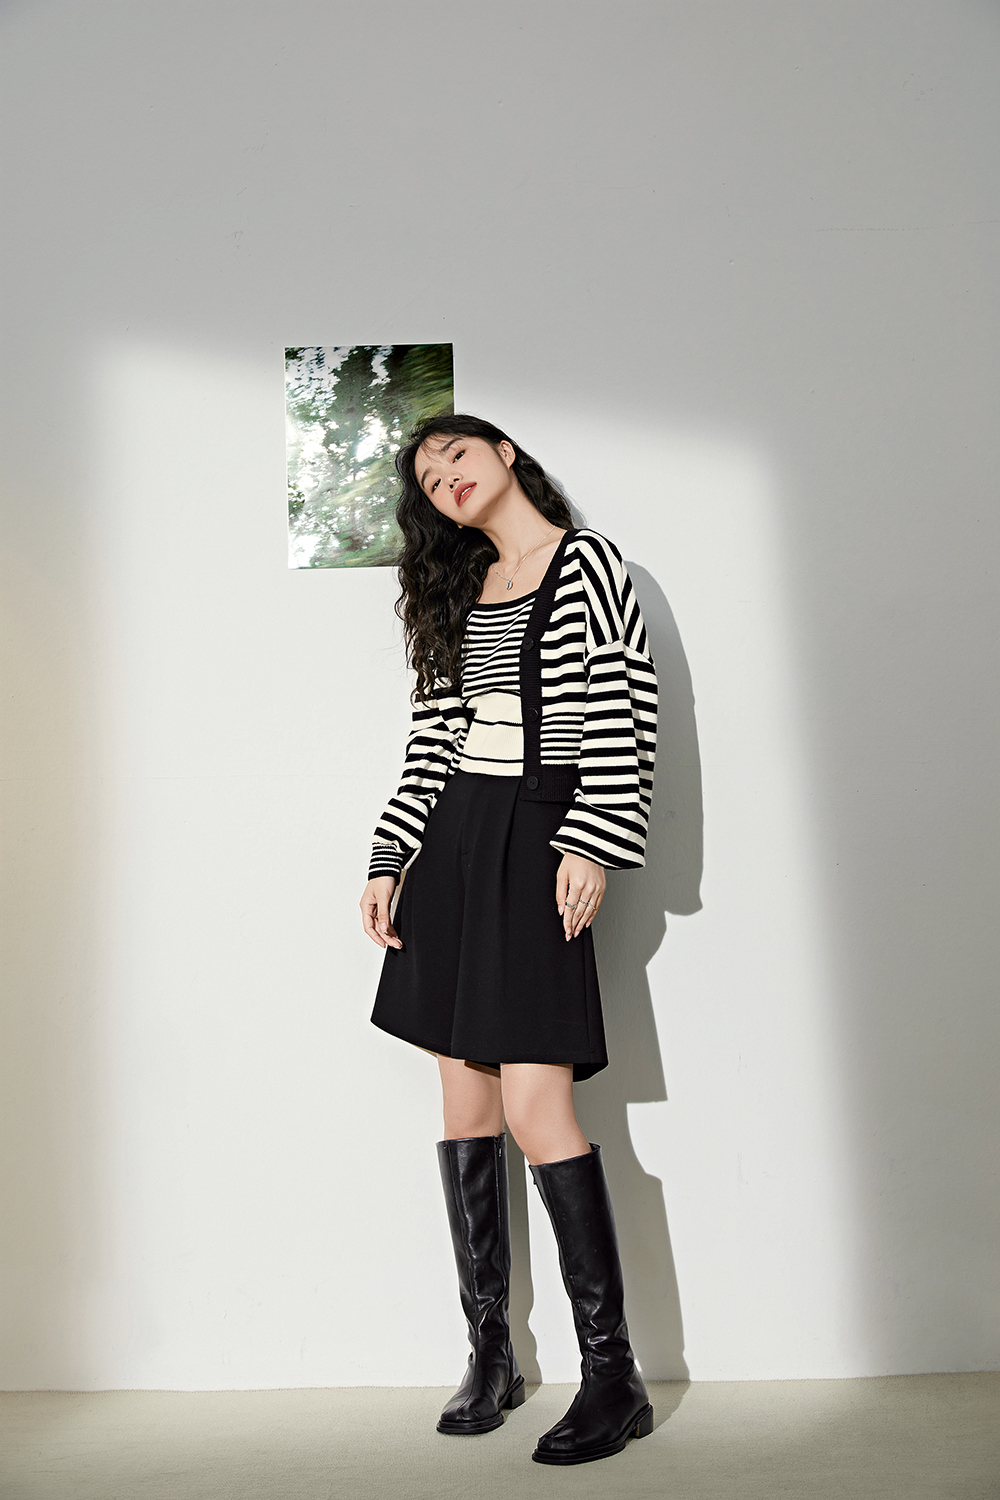 Broad-colored striped knit two-piece set new women's vest and cardigan jacket for autumn/winter 2022